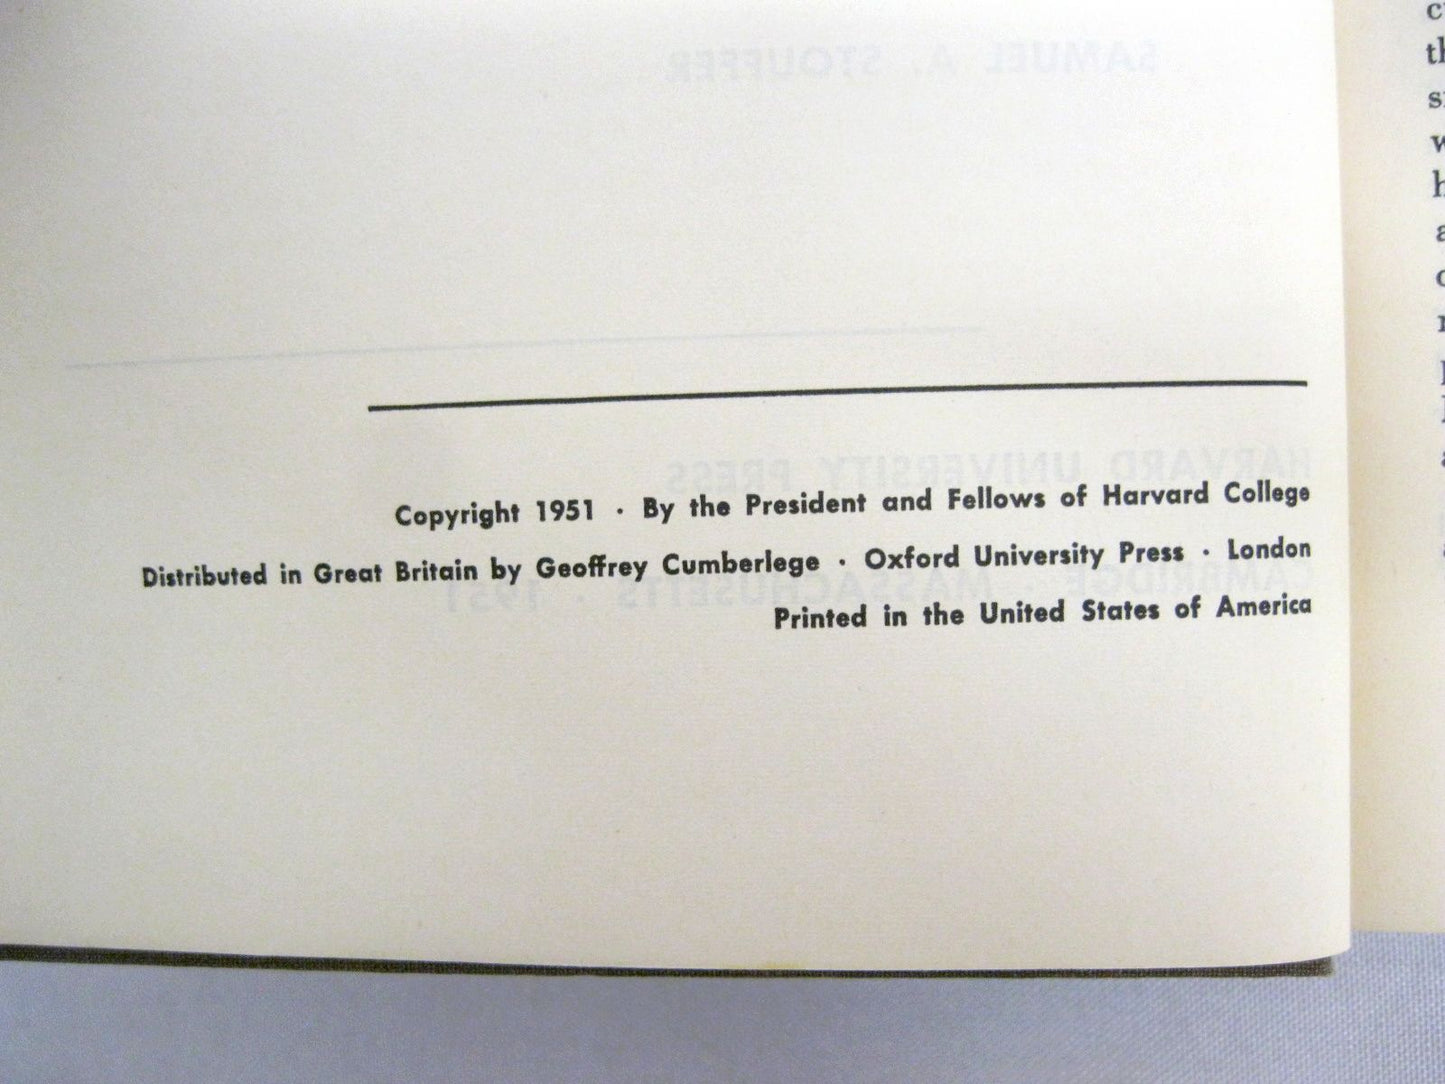 Toward a General Theory of Action edited by Talcott Parsons and Edward A. Shils